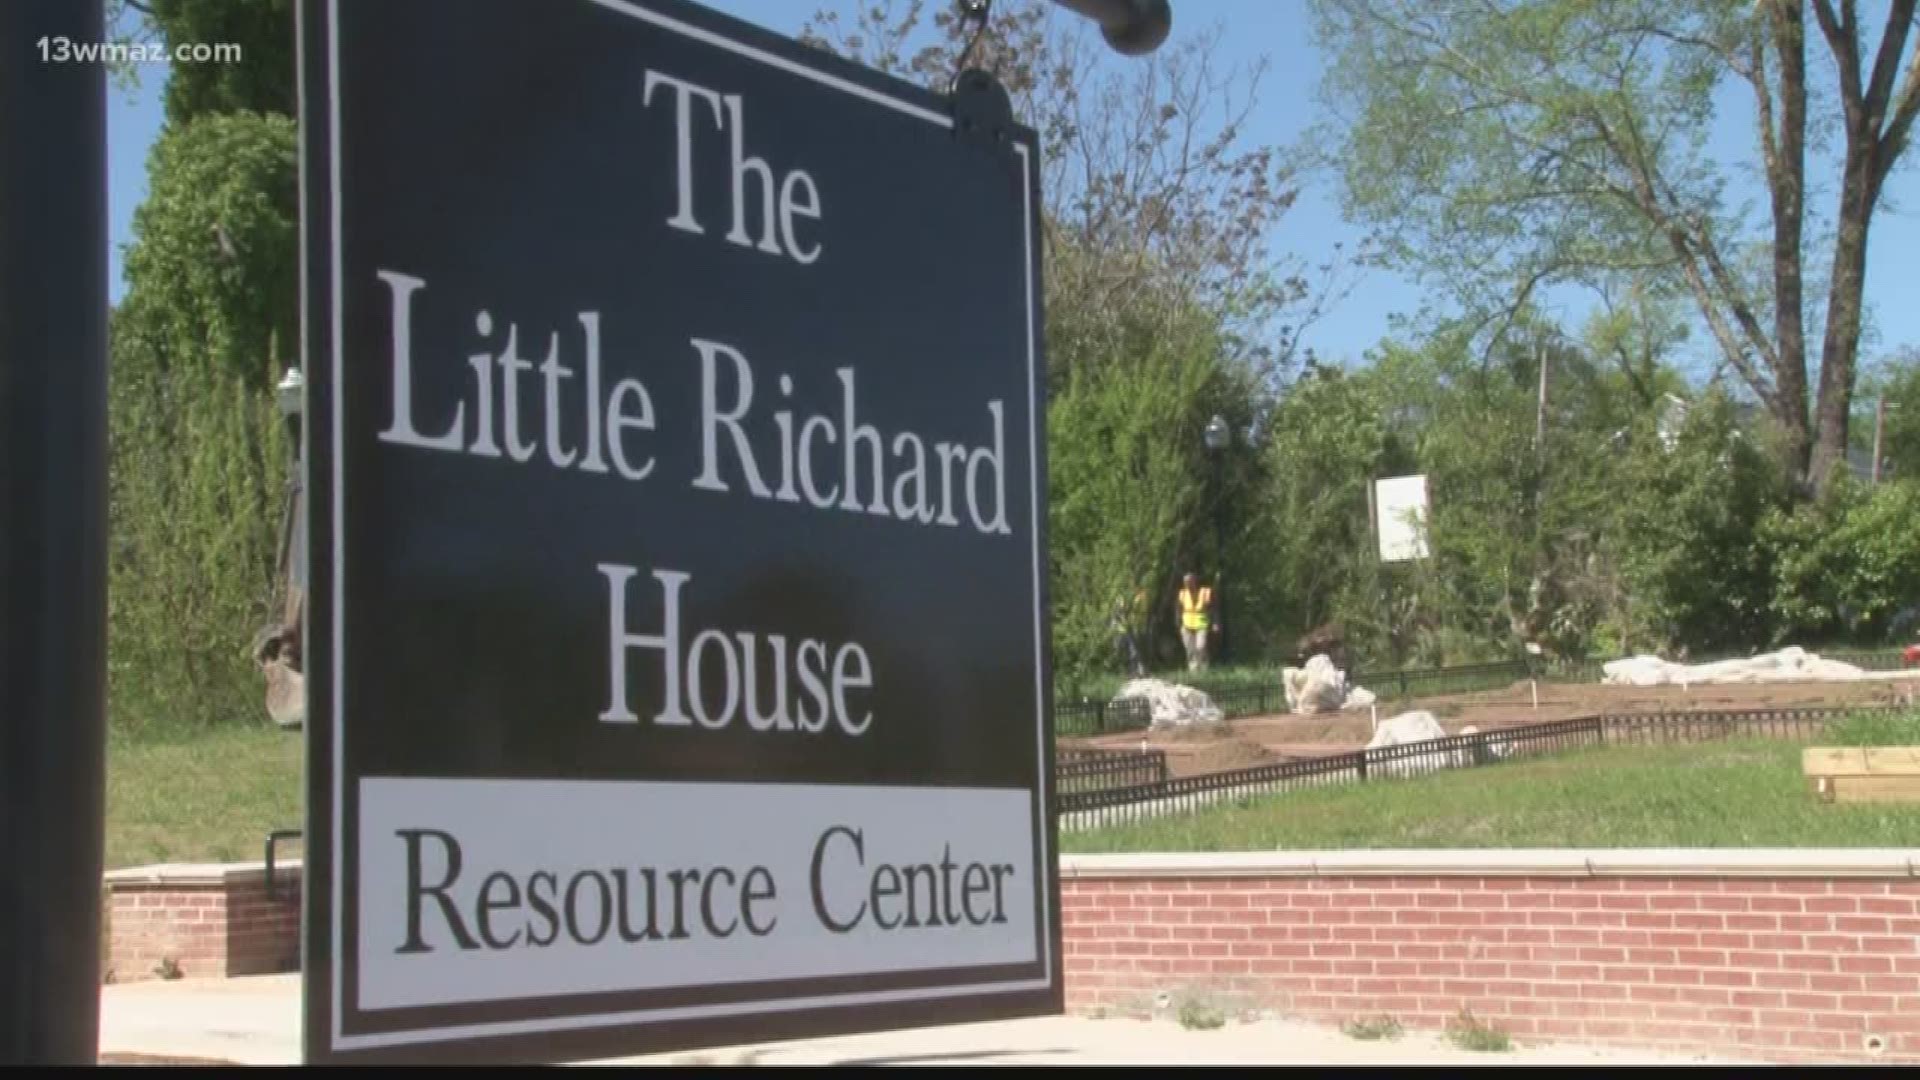 The childhood home of Macon music legend Little Richard has found new life as a community resource center. The Community Enhancement Authority plans to use the Little Richard House to help turn around a neighborhood.